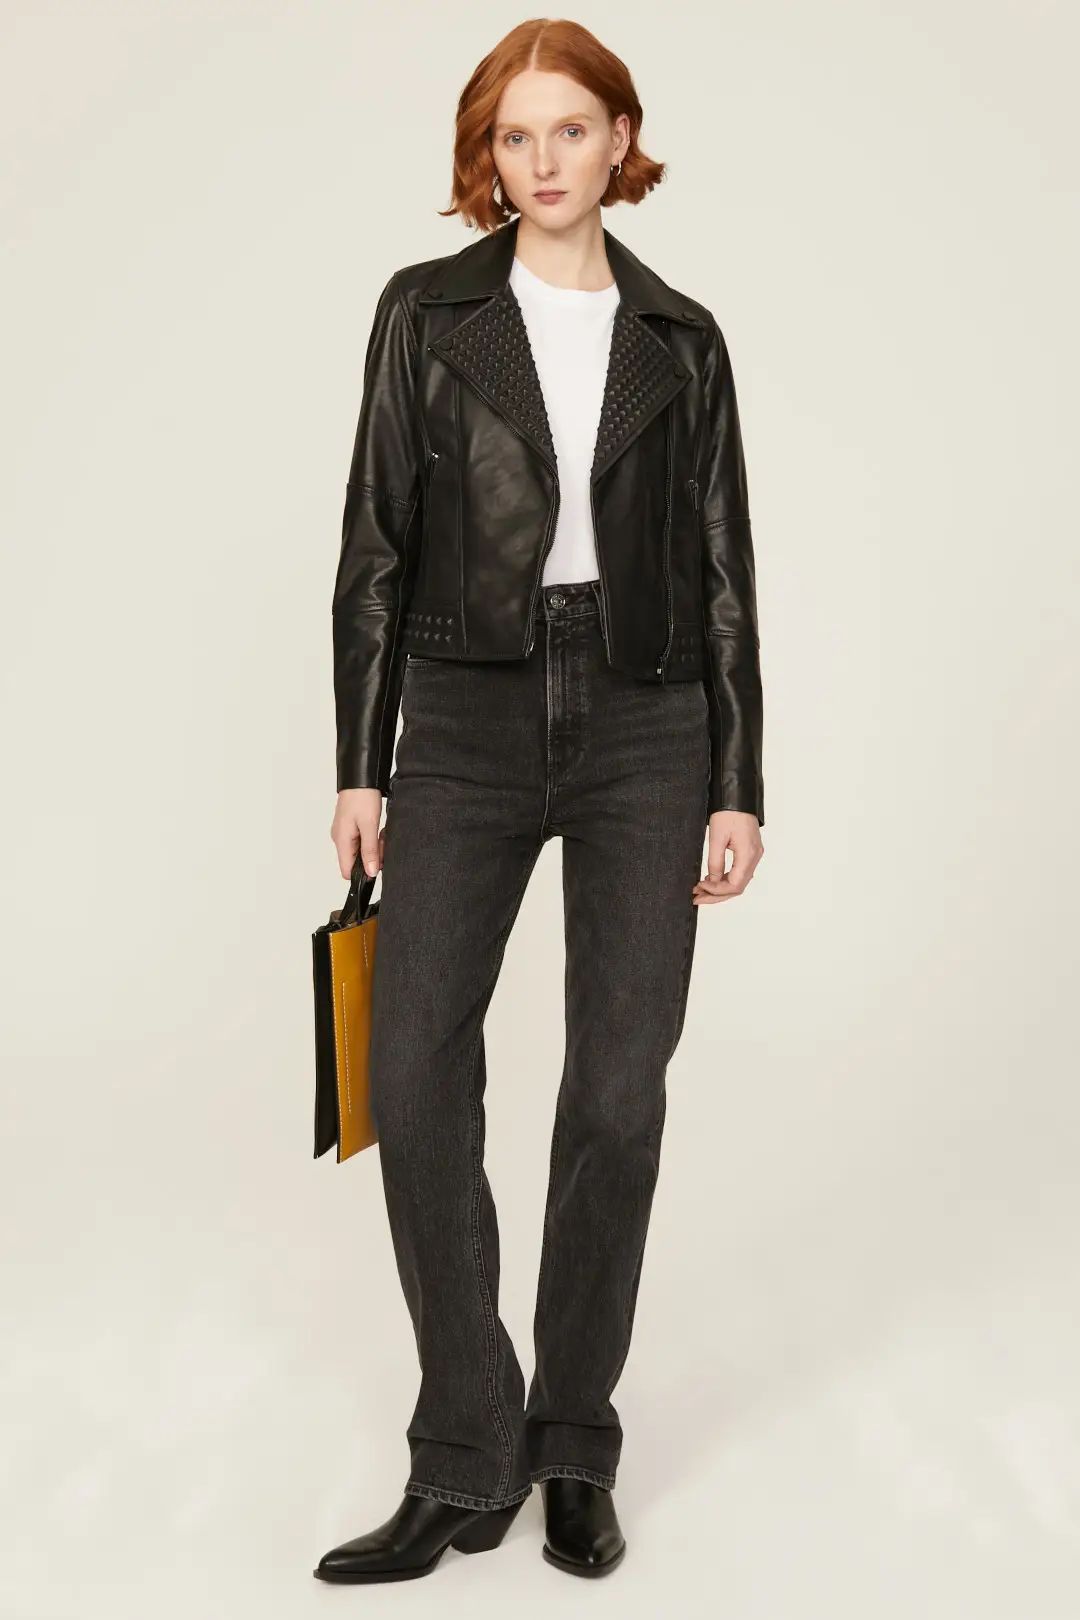 Slate & Willow Textured Leather Jacket | Rent The Runway